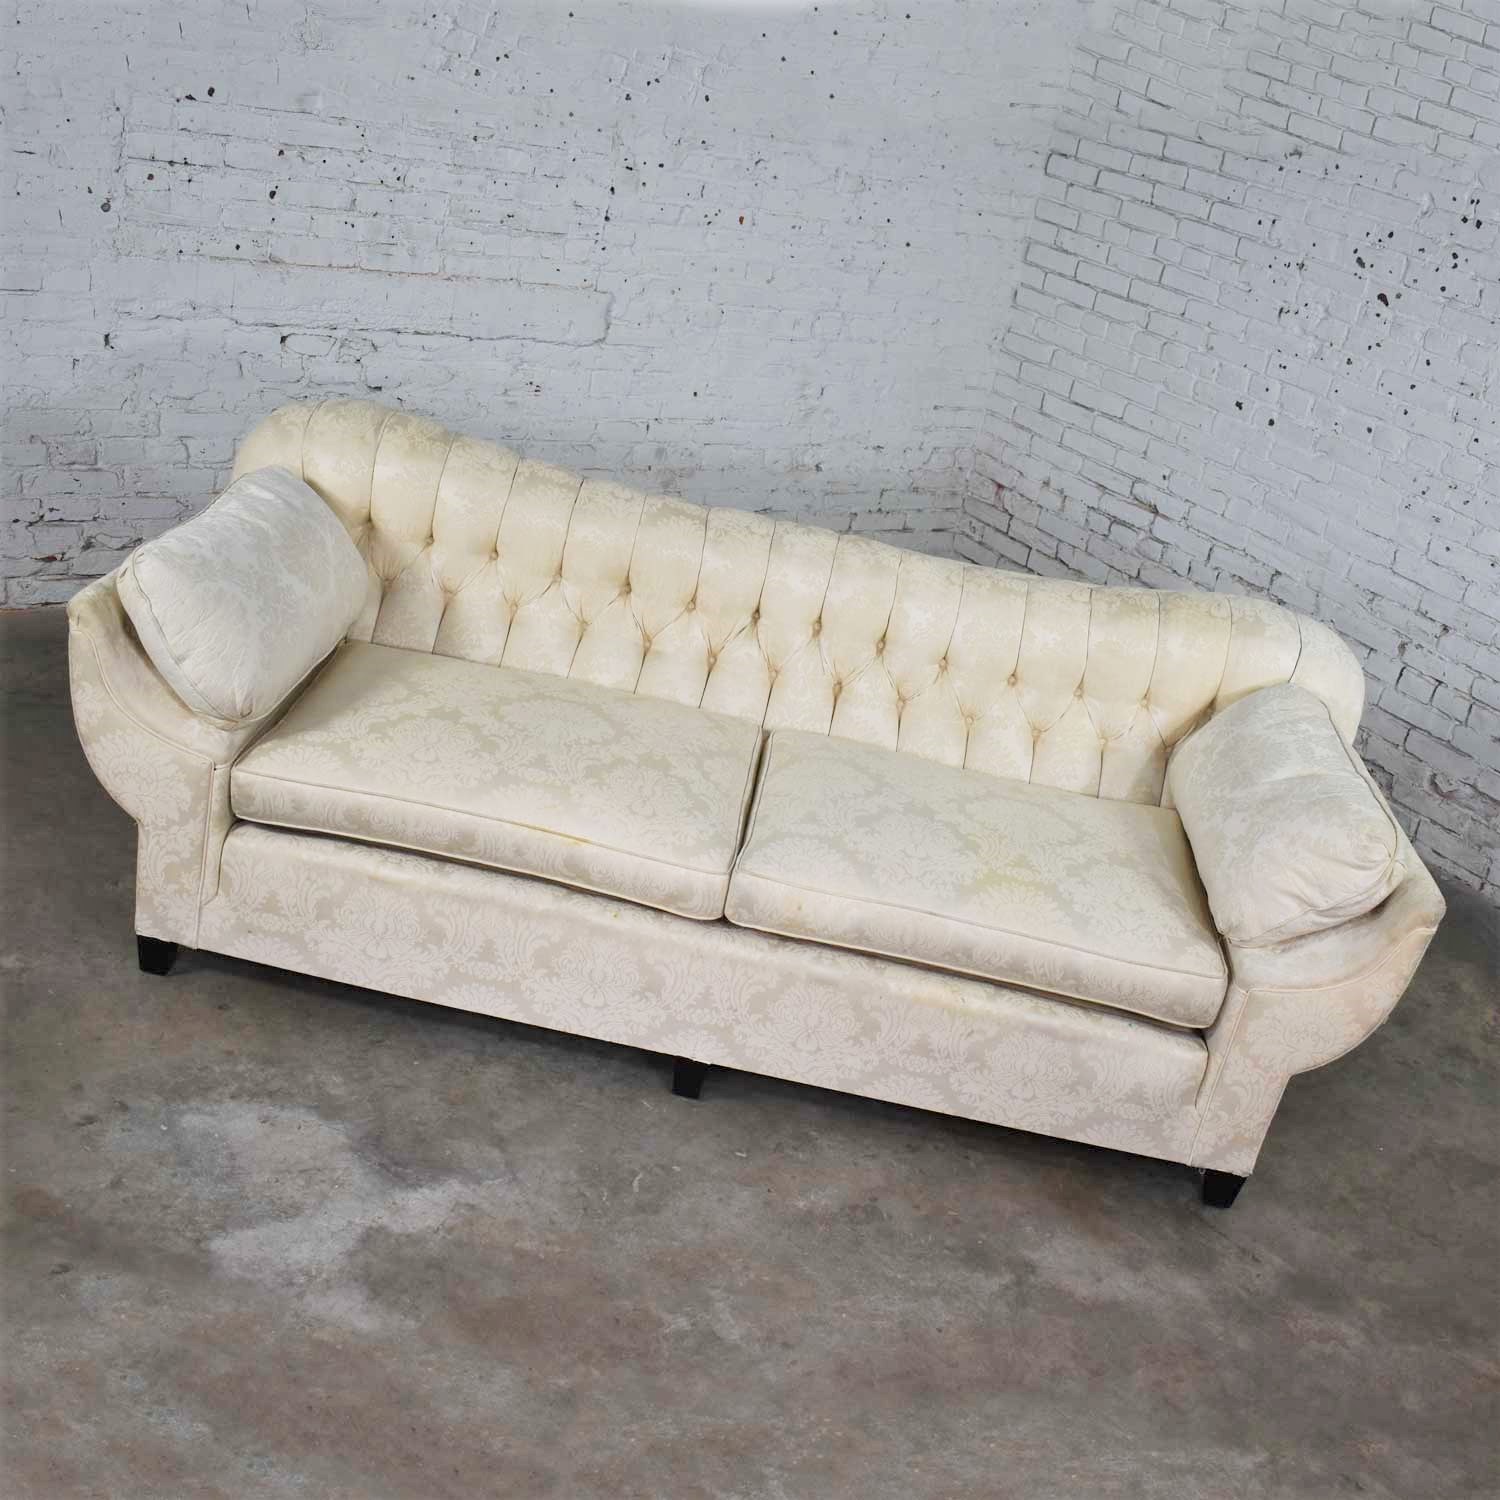 Vintage Art Deco Hollywood Regency Sofa with Tufted Back and Concave Pillowed Arms